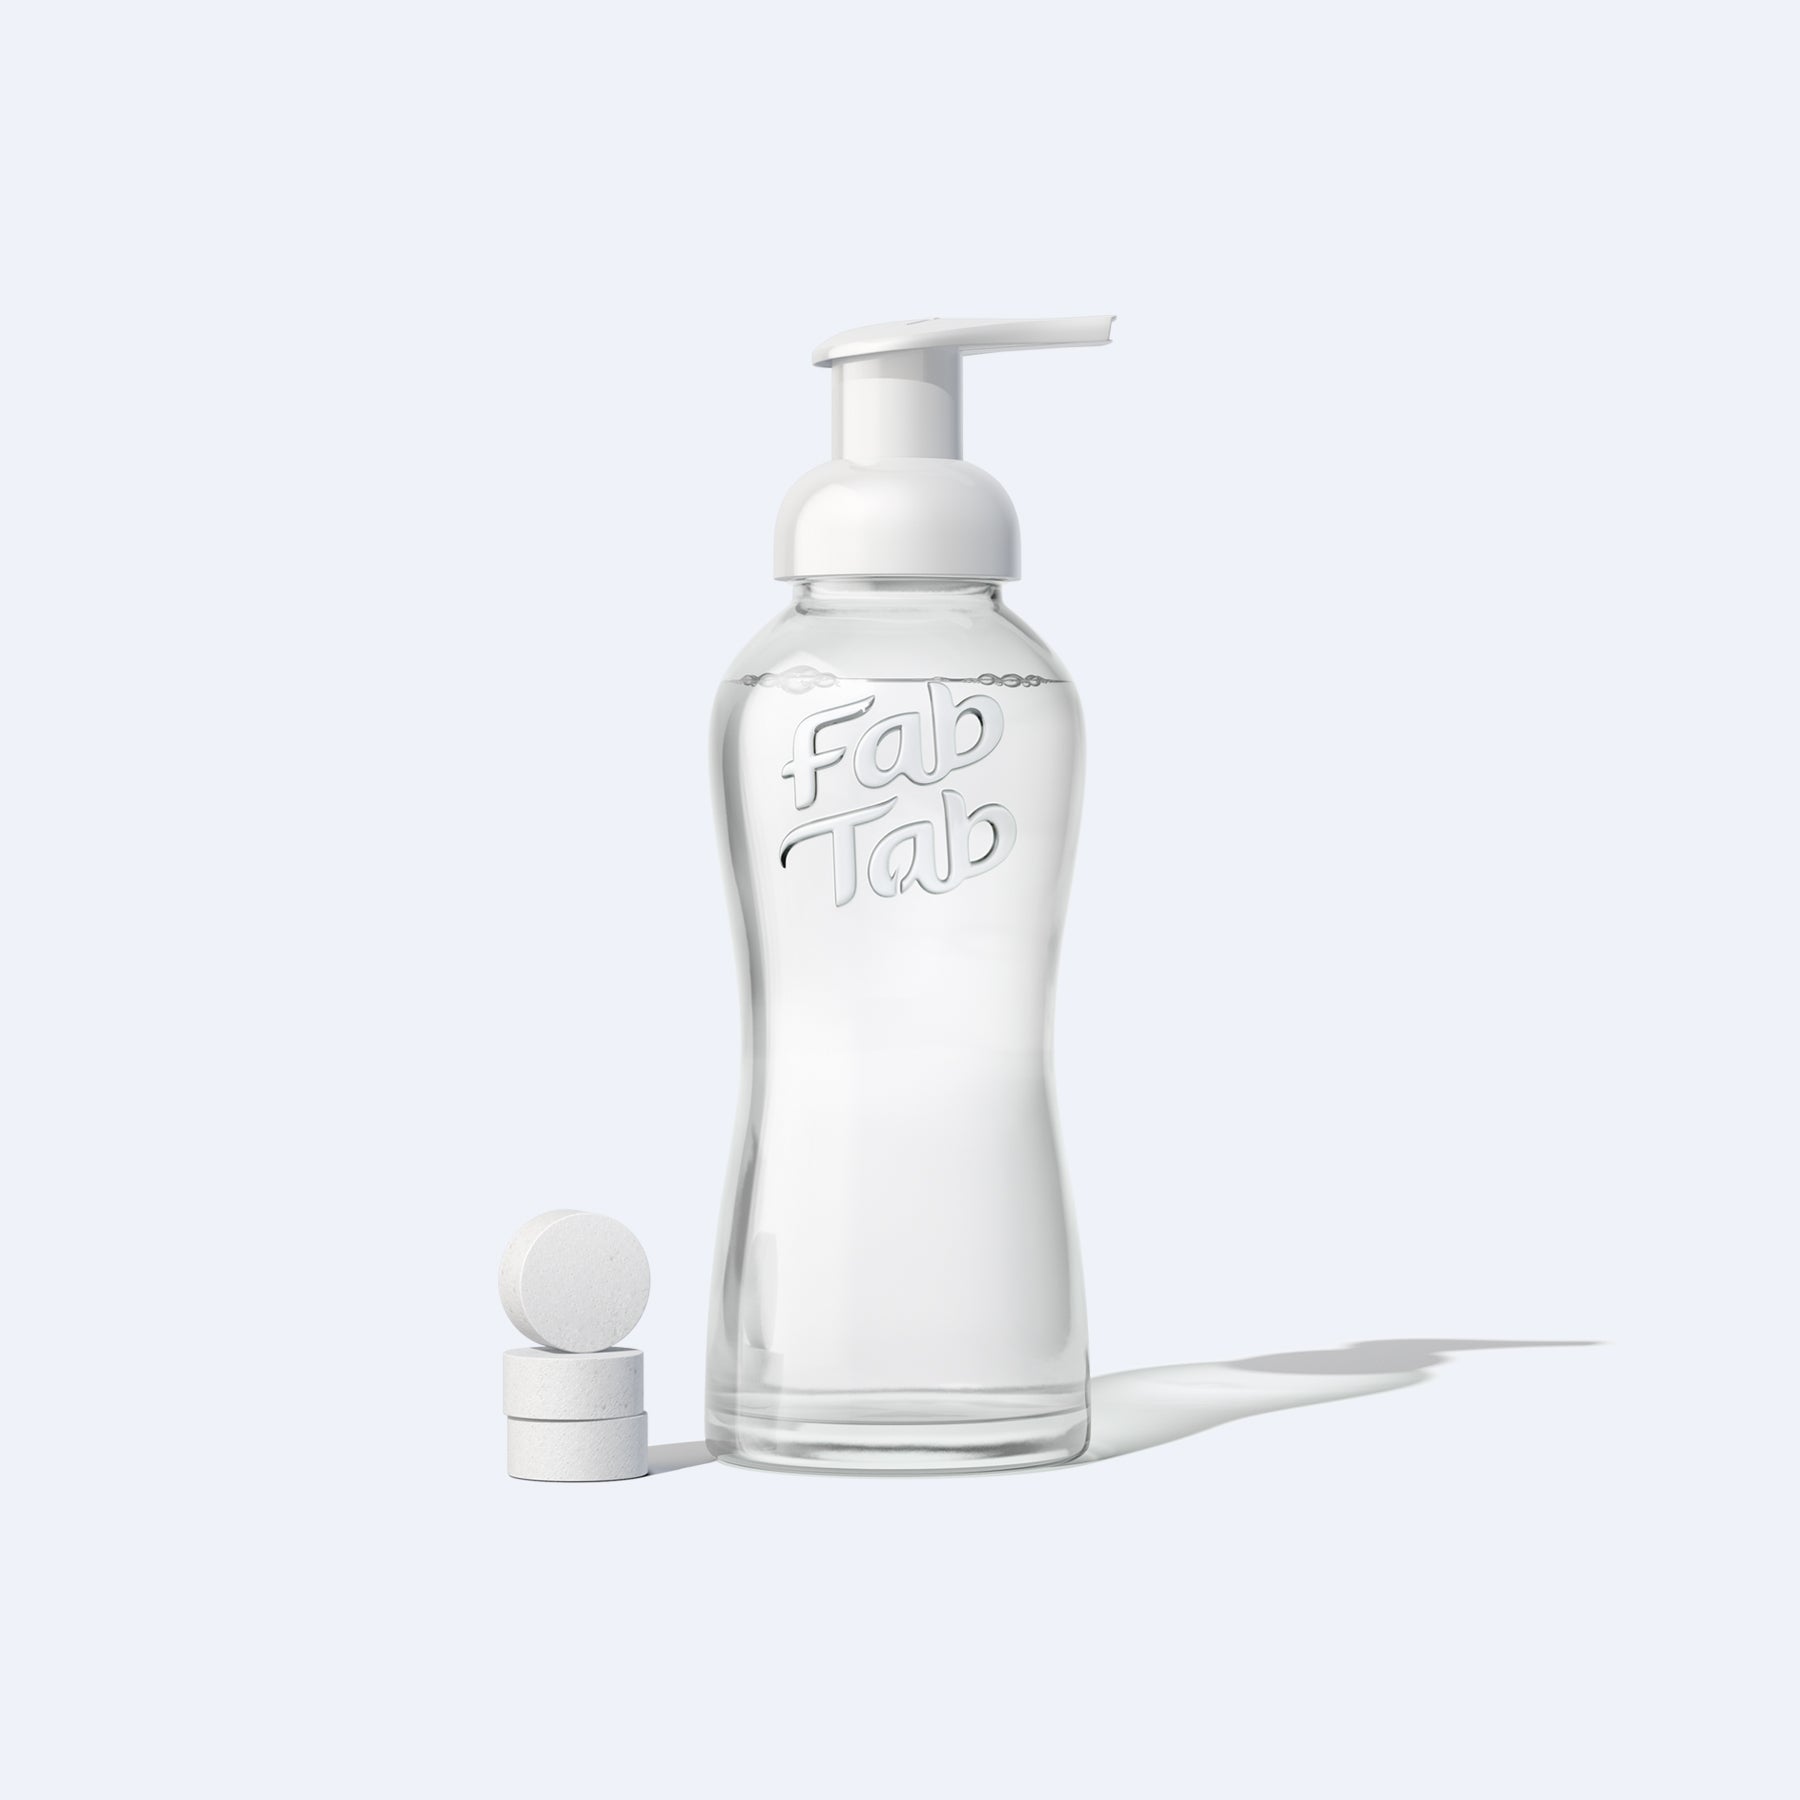 Load video: &lt;p&gt;Our fabulously eco-friendly glass bottle for foaming hand soap is the rockstar of sustainability. Not your average soap star – it&#39;s got a foaming pump that turns washing into a bubbly symphony for your hands!&lt;/p&gt;